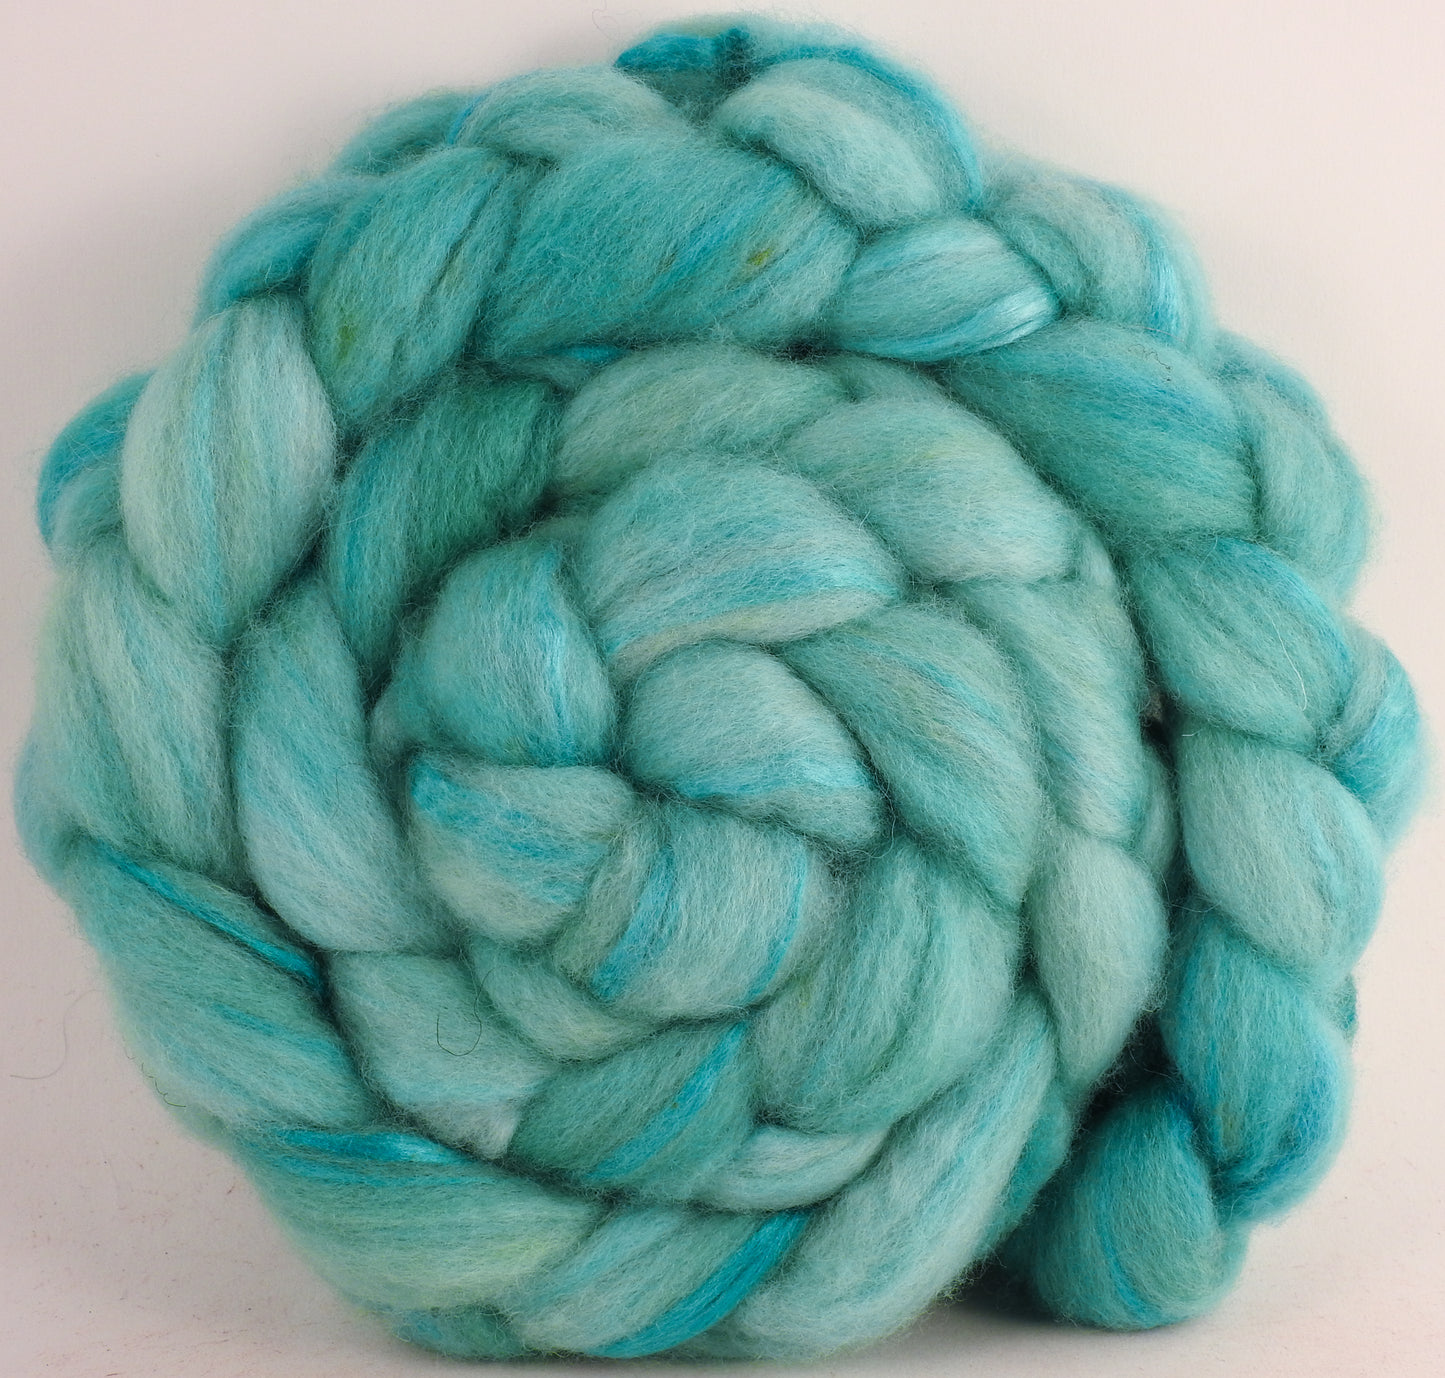 Blue-faced Leicester/ Tussah Silk (70/30) - Waterfall - (5.6 oz.)